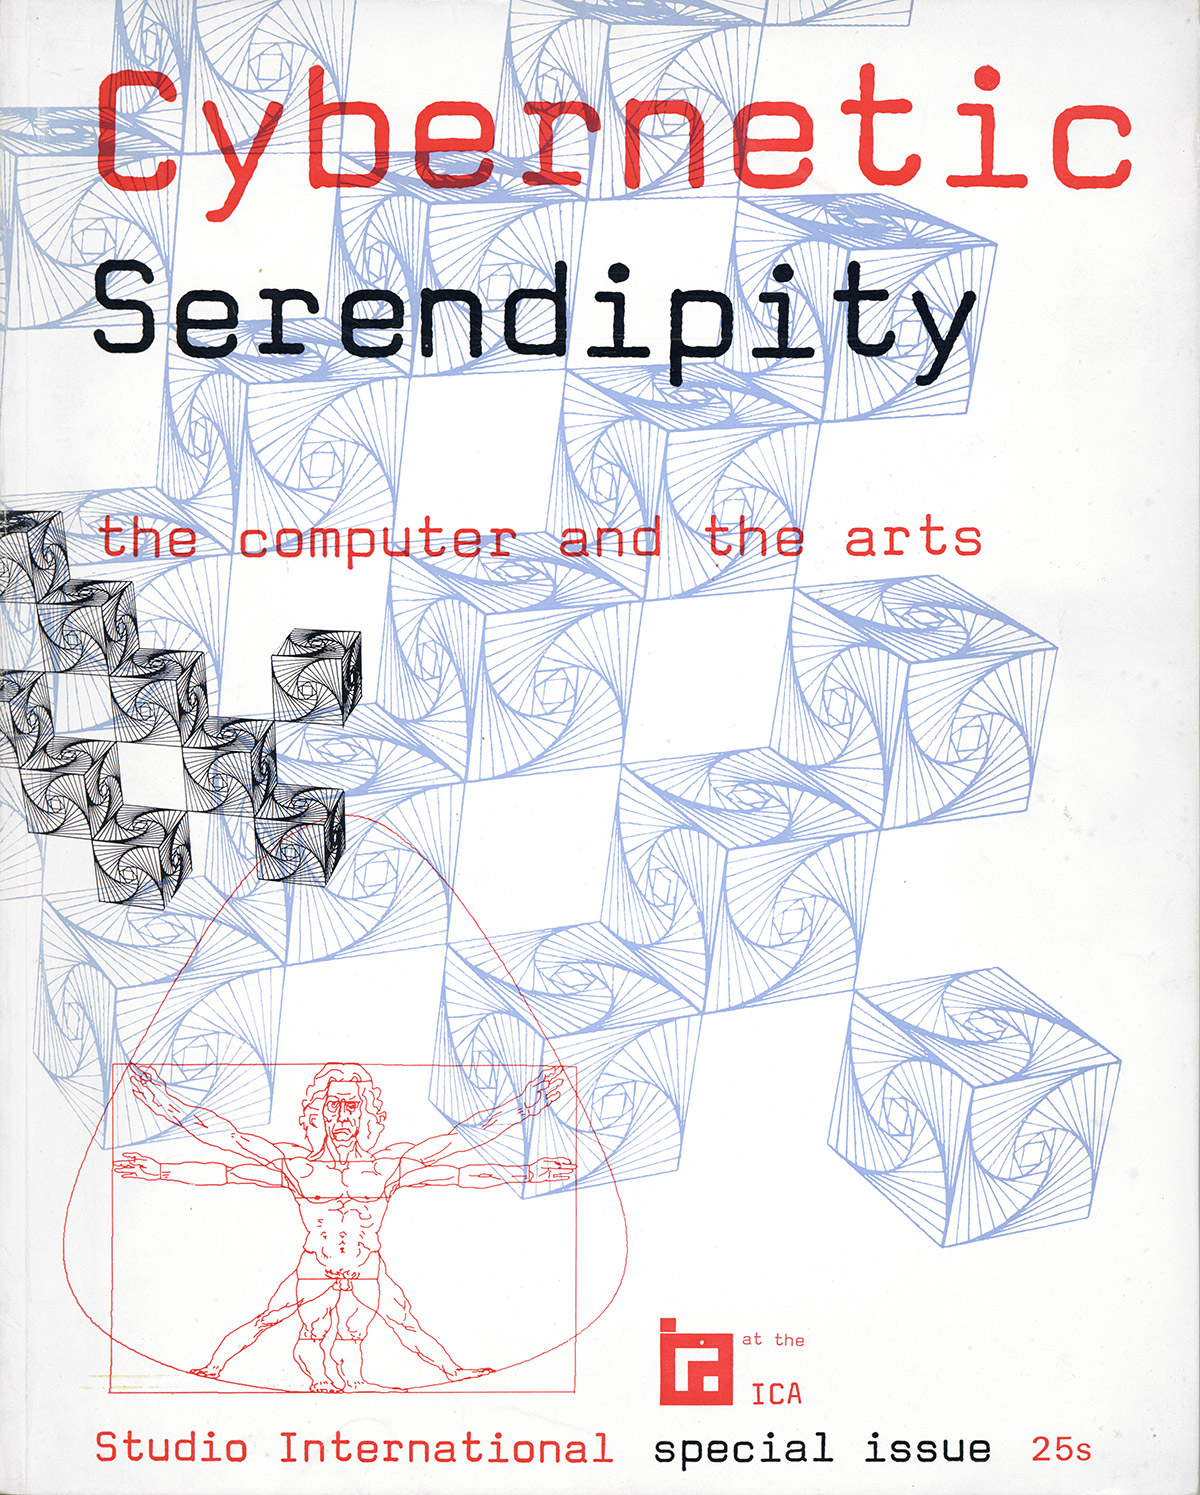 Cybernetic Serendipity: The Computer and the Arts, Studio International Special Issue, 1968. Cover design by Franciszka Themerson.